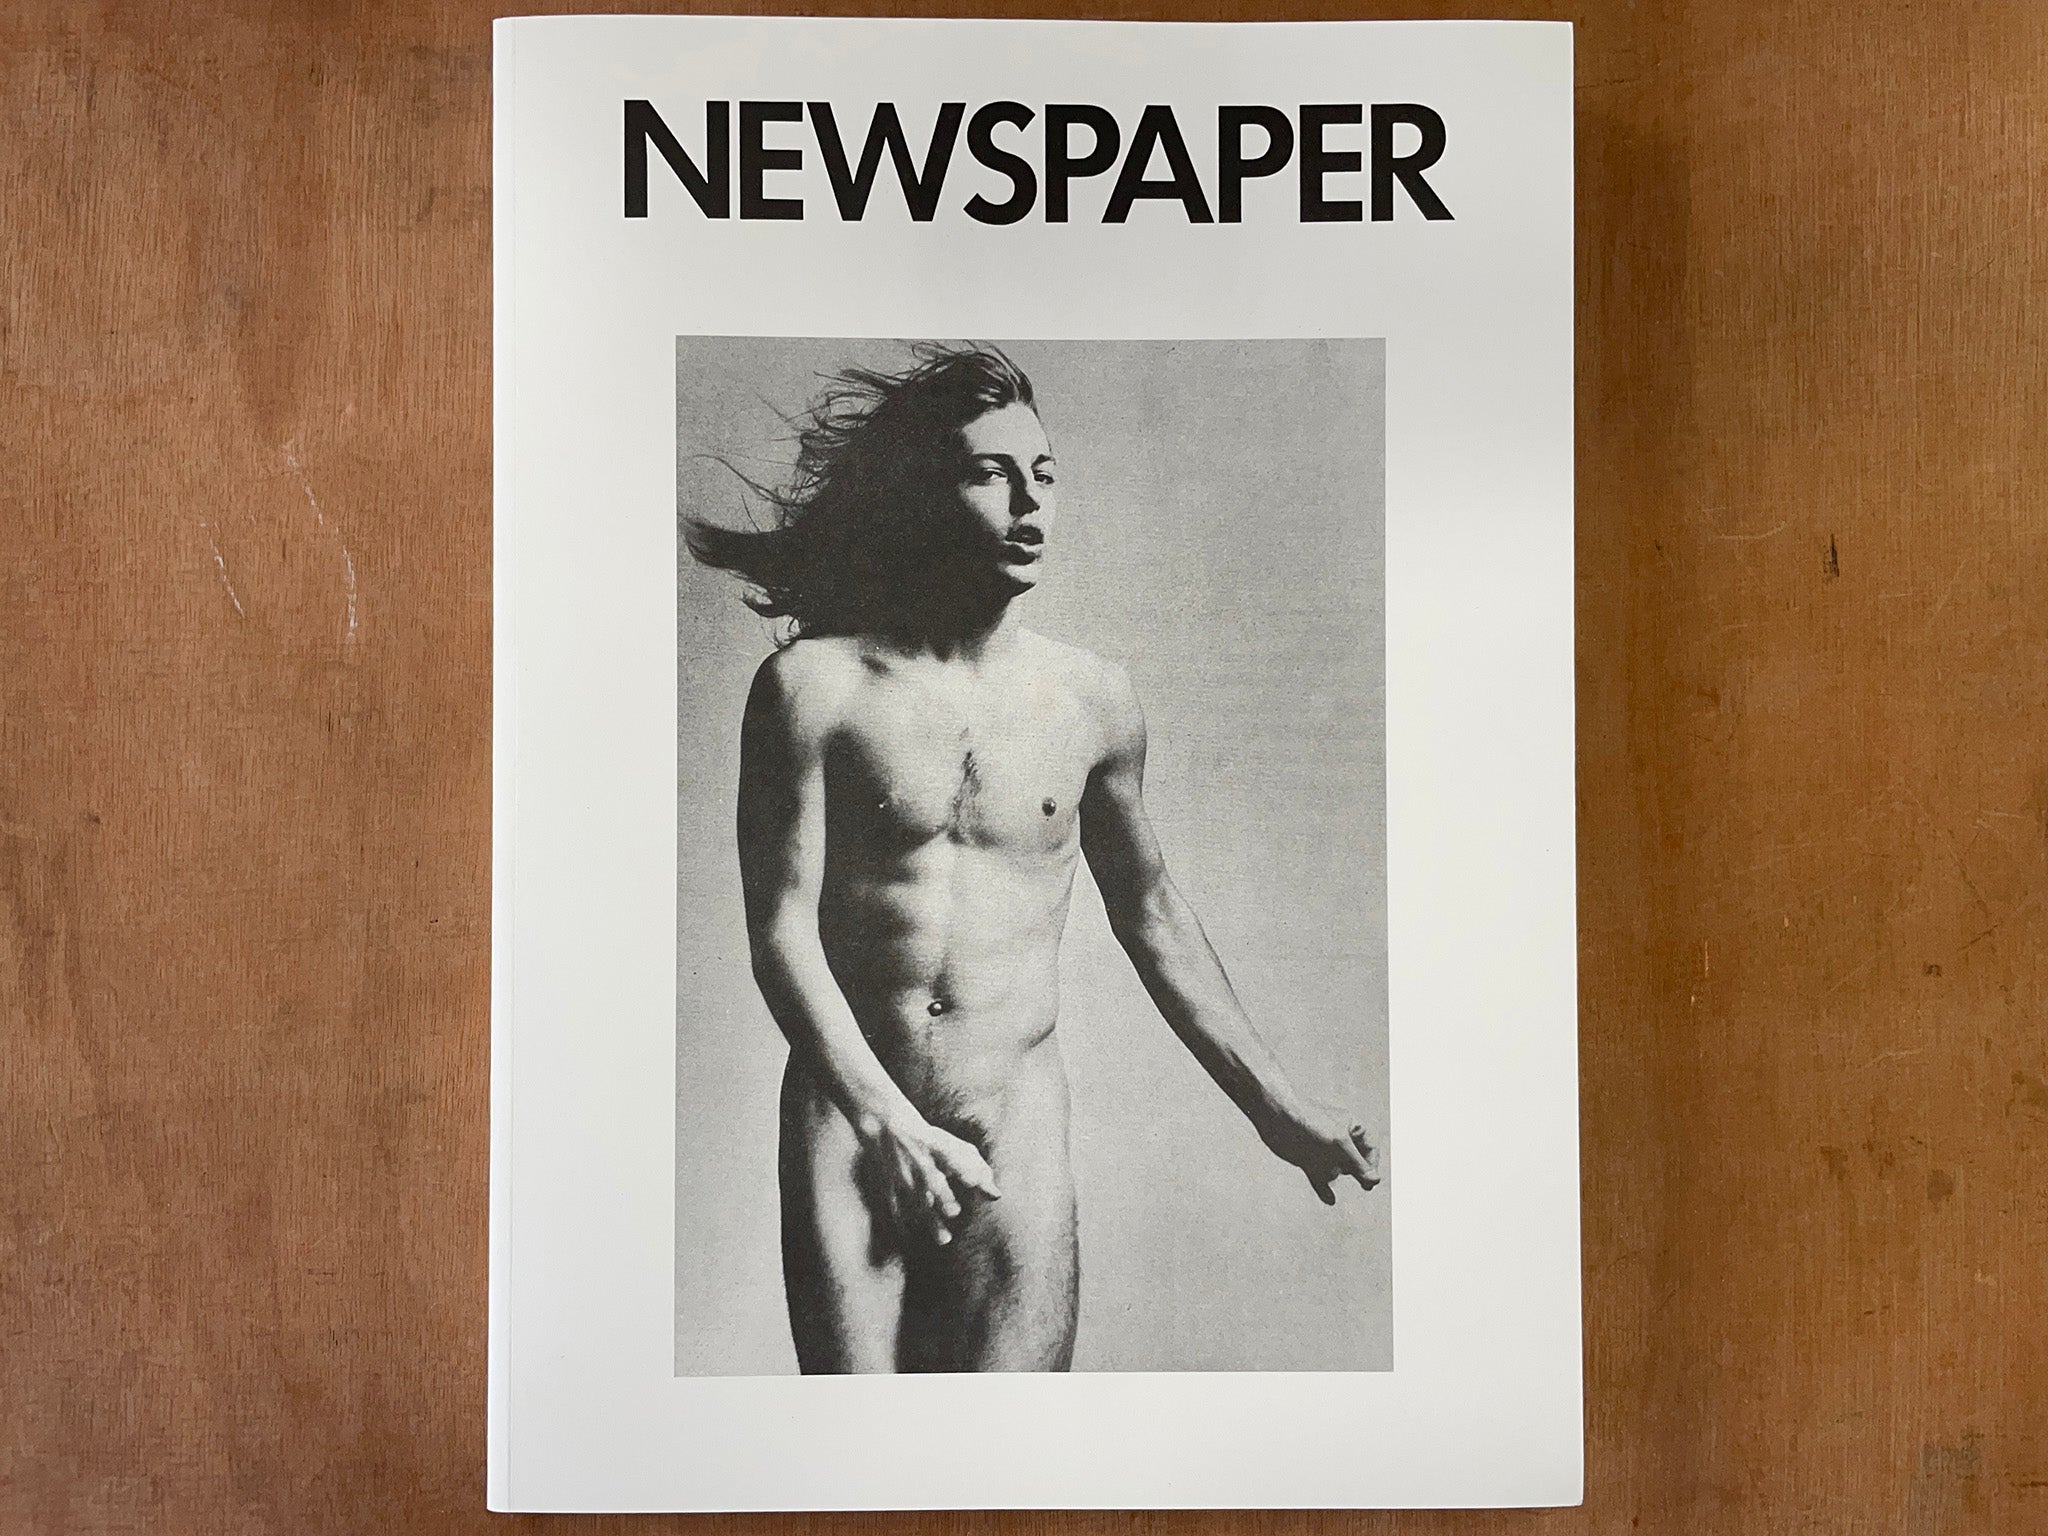 NEWSPAPER Edited by Peter Hujar and Steve Lawrence